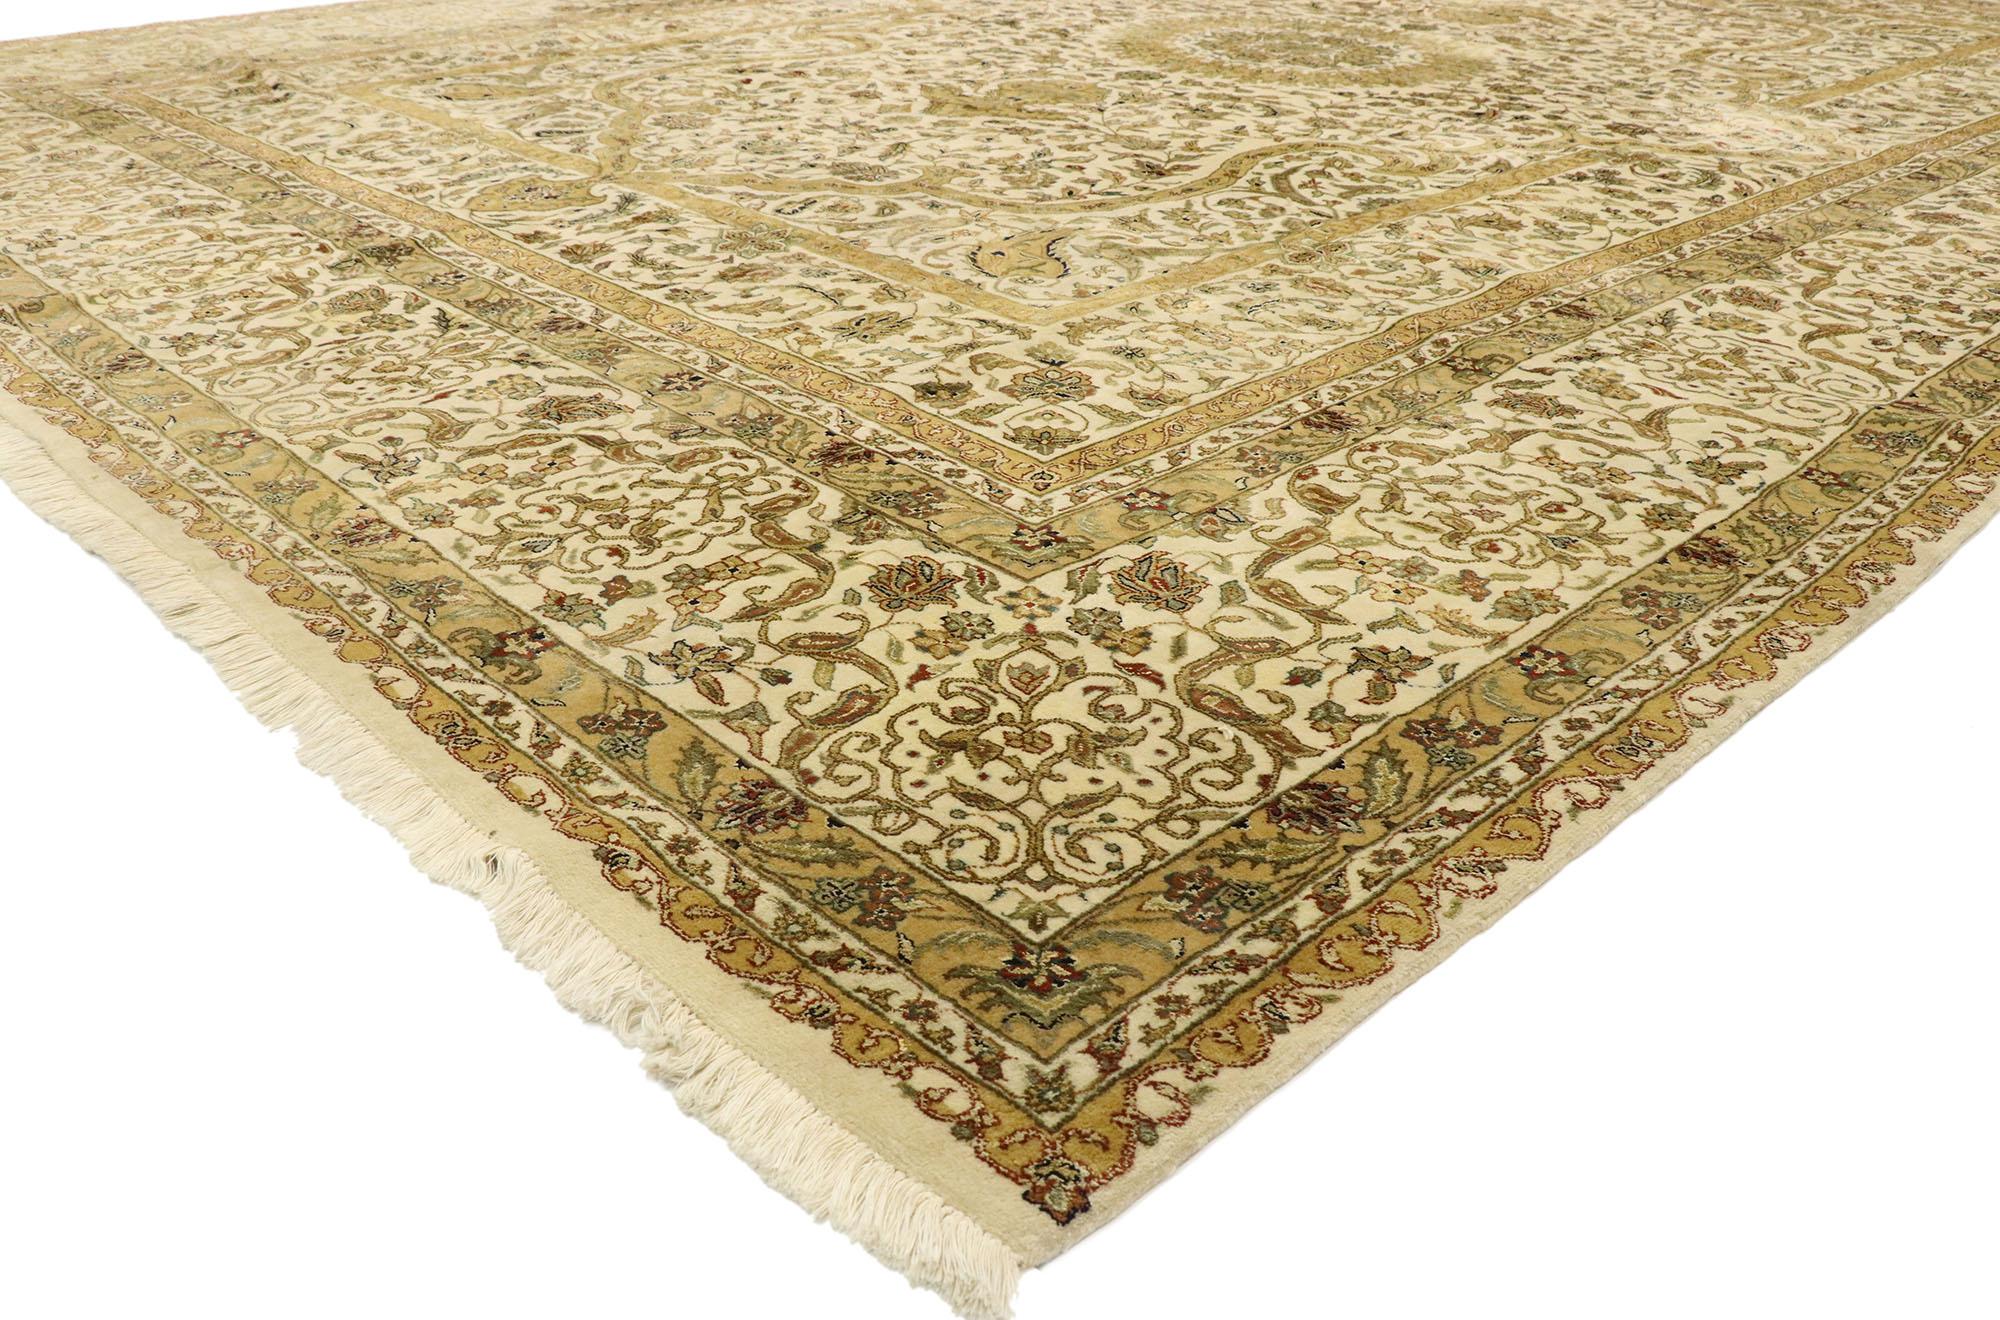 77520, vintage Indian Area rug with French Neoclassical Renaissance style. With ornate details and well-balanced symmetry combined with a neutral color palette, this hand knotted wool vintage Indian area rug beautifully embodies both French